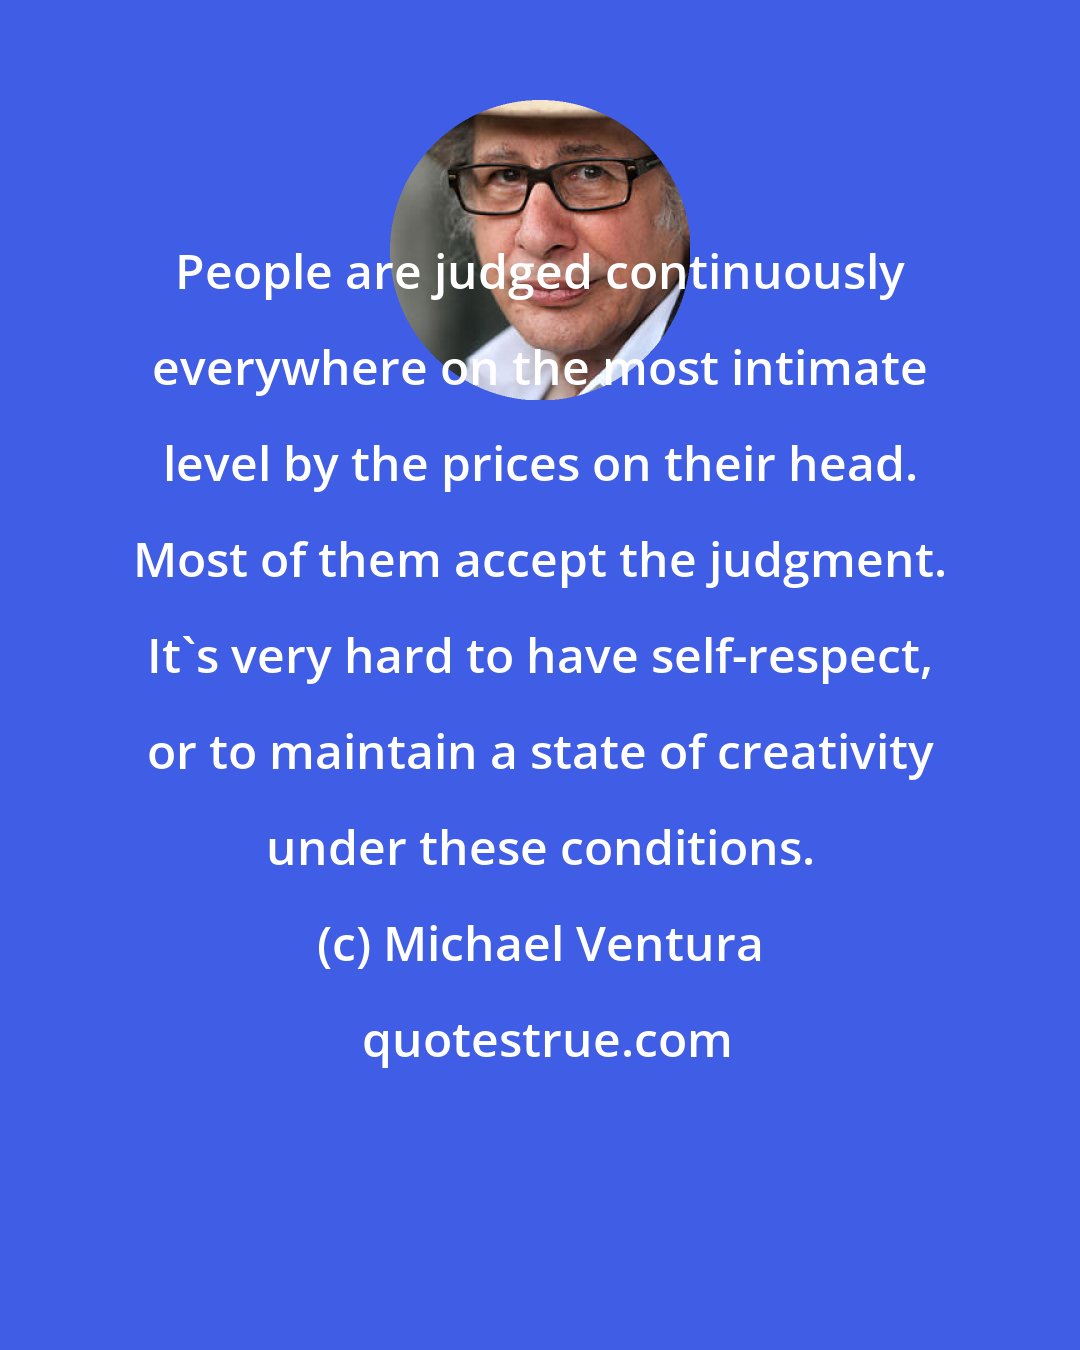 Michael Ventura: People are judged continuously everywhere on the most intimate level by the prices on their head. Most of them accept the judgment. It's very hard to have self-respect, or to maintain a state of creativity under these conditions.